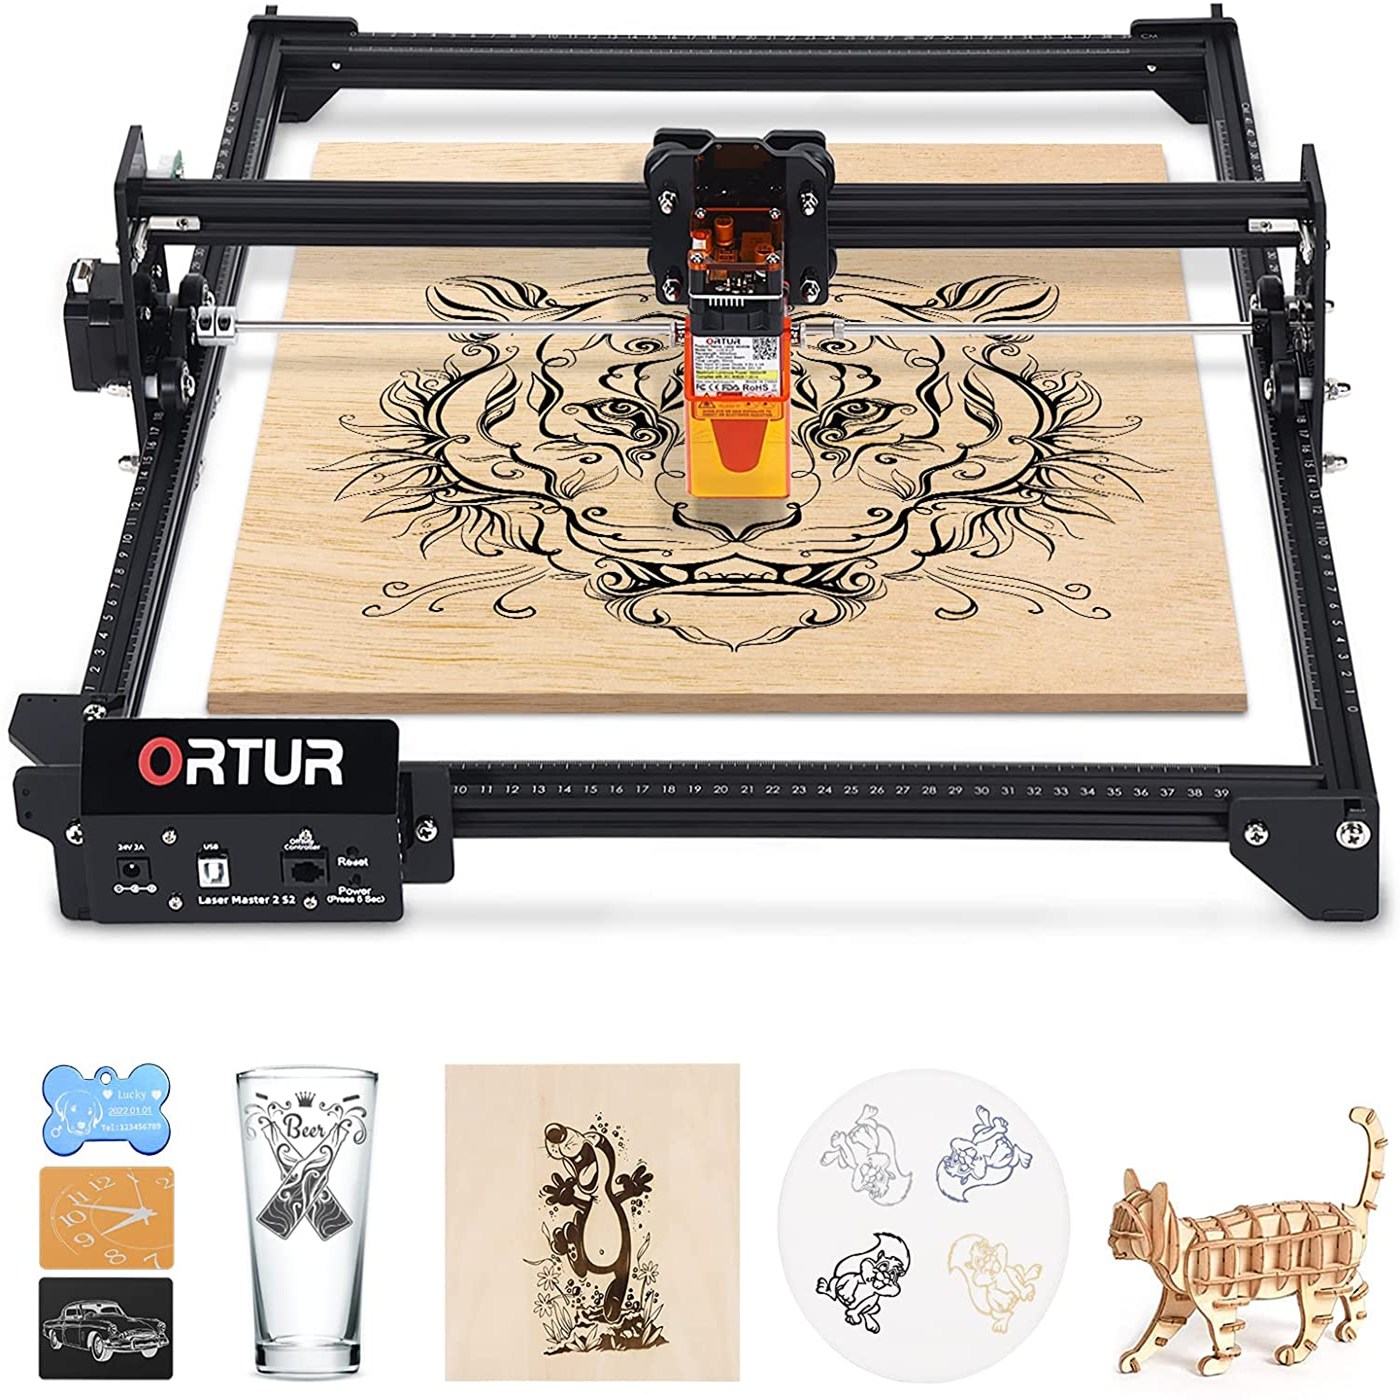 Find [EU DIRECT] ORTUR Laser Master 2 Pro S2 LU2-4 LF Upgraded Laser Engraving Cutting Machine Cutter 400 x 430mm Large Engraving Area Fast Speed High Precision Laser Engraver for Sale on Gipsybee.com with cryptocurrencies